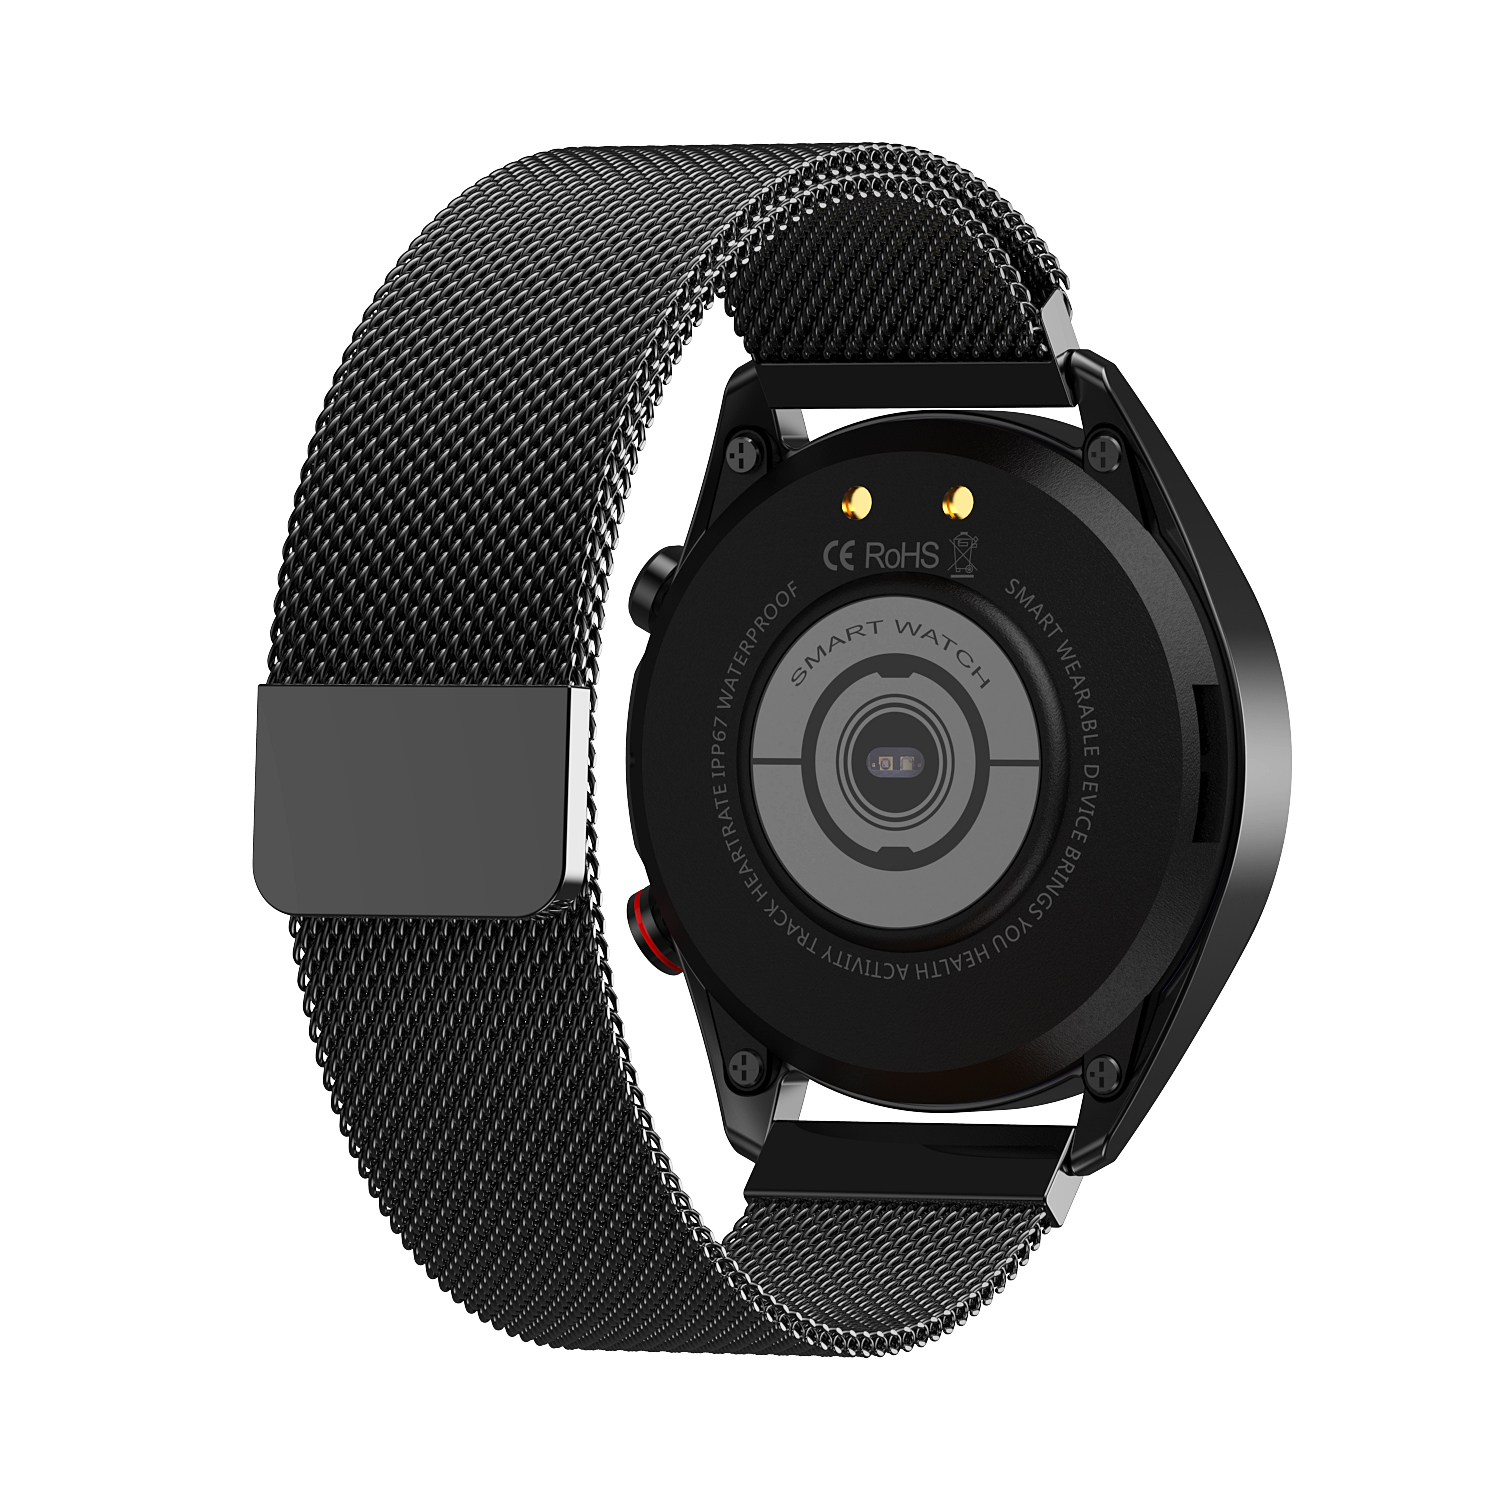 New Heart Rate Monitoring Smart Sport Watch with Music Control